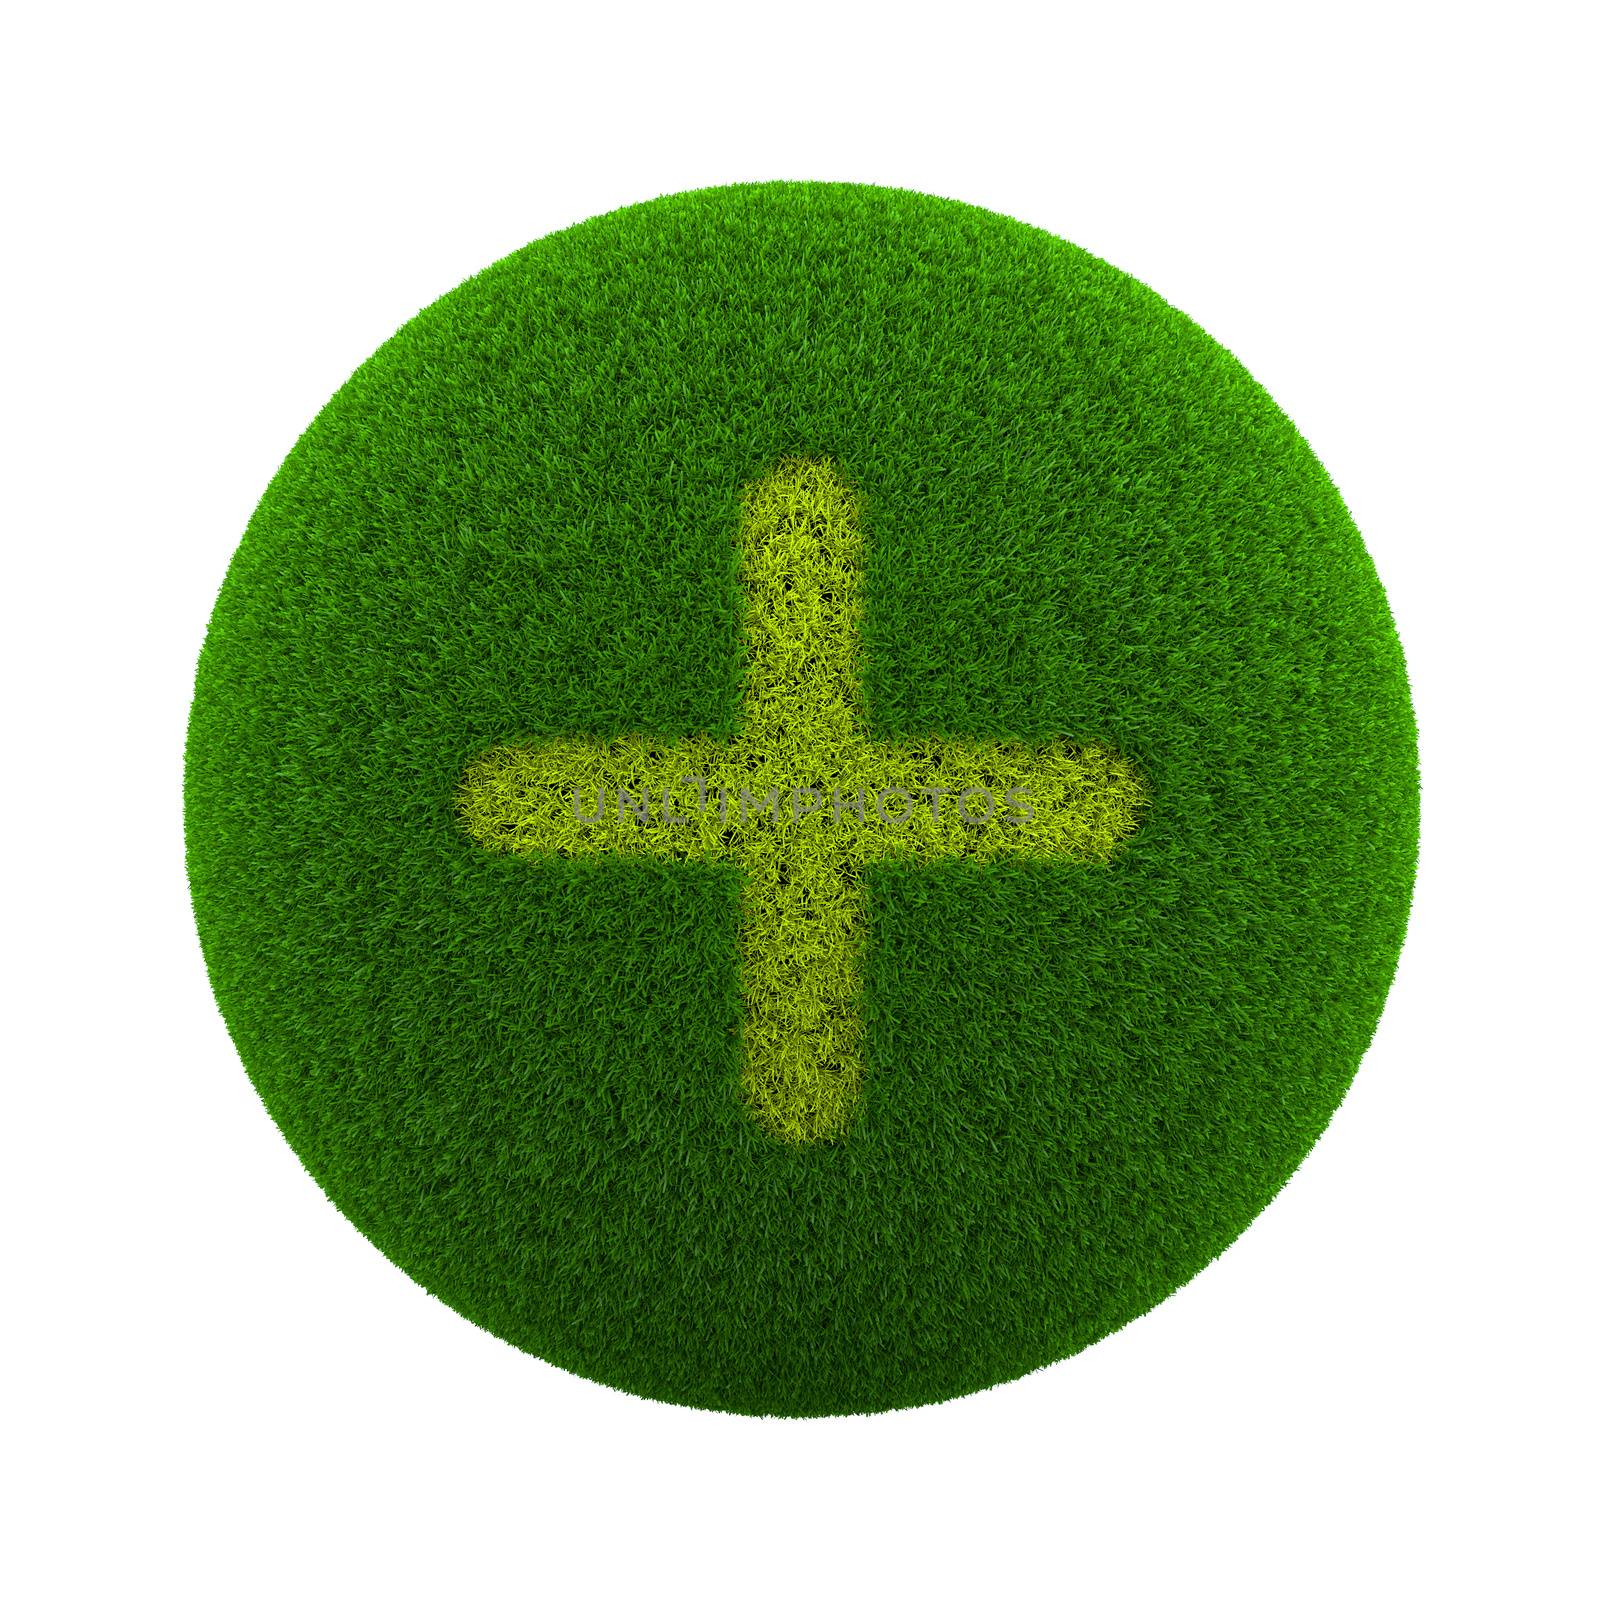 Green Globe with Grass Cutted in the Shape of a Plus Symbol 3D Illustration Isolated on White Background